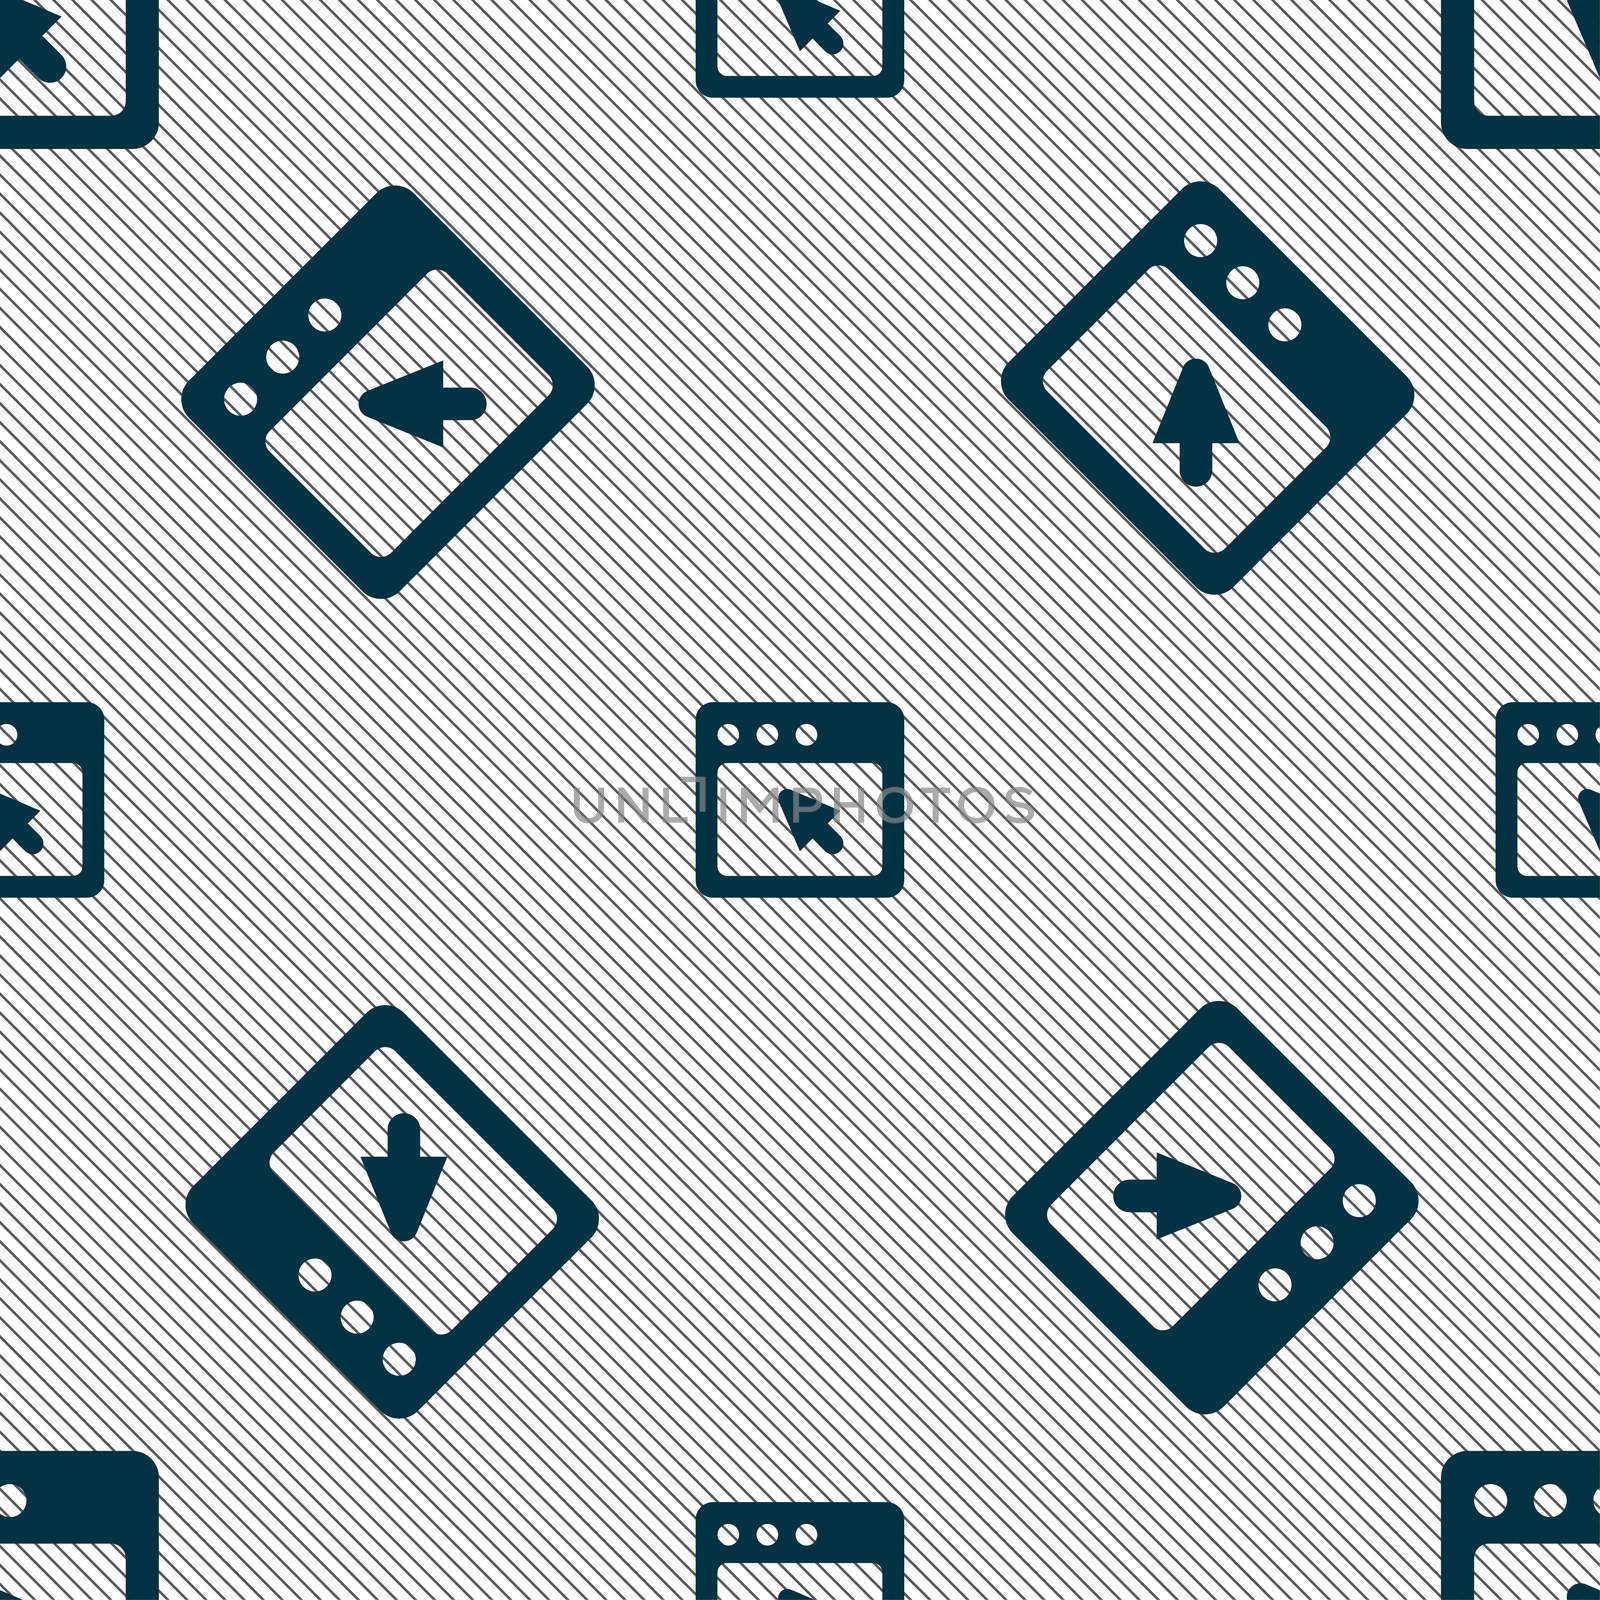 the dialog box icon sign. Seamless pattern with geometric texture. illustration